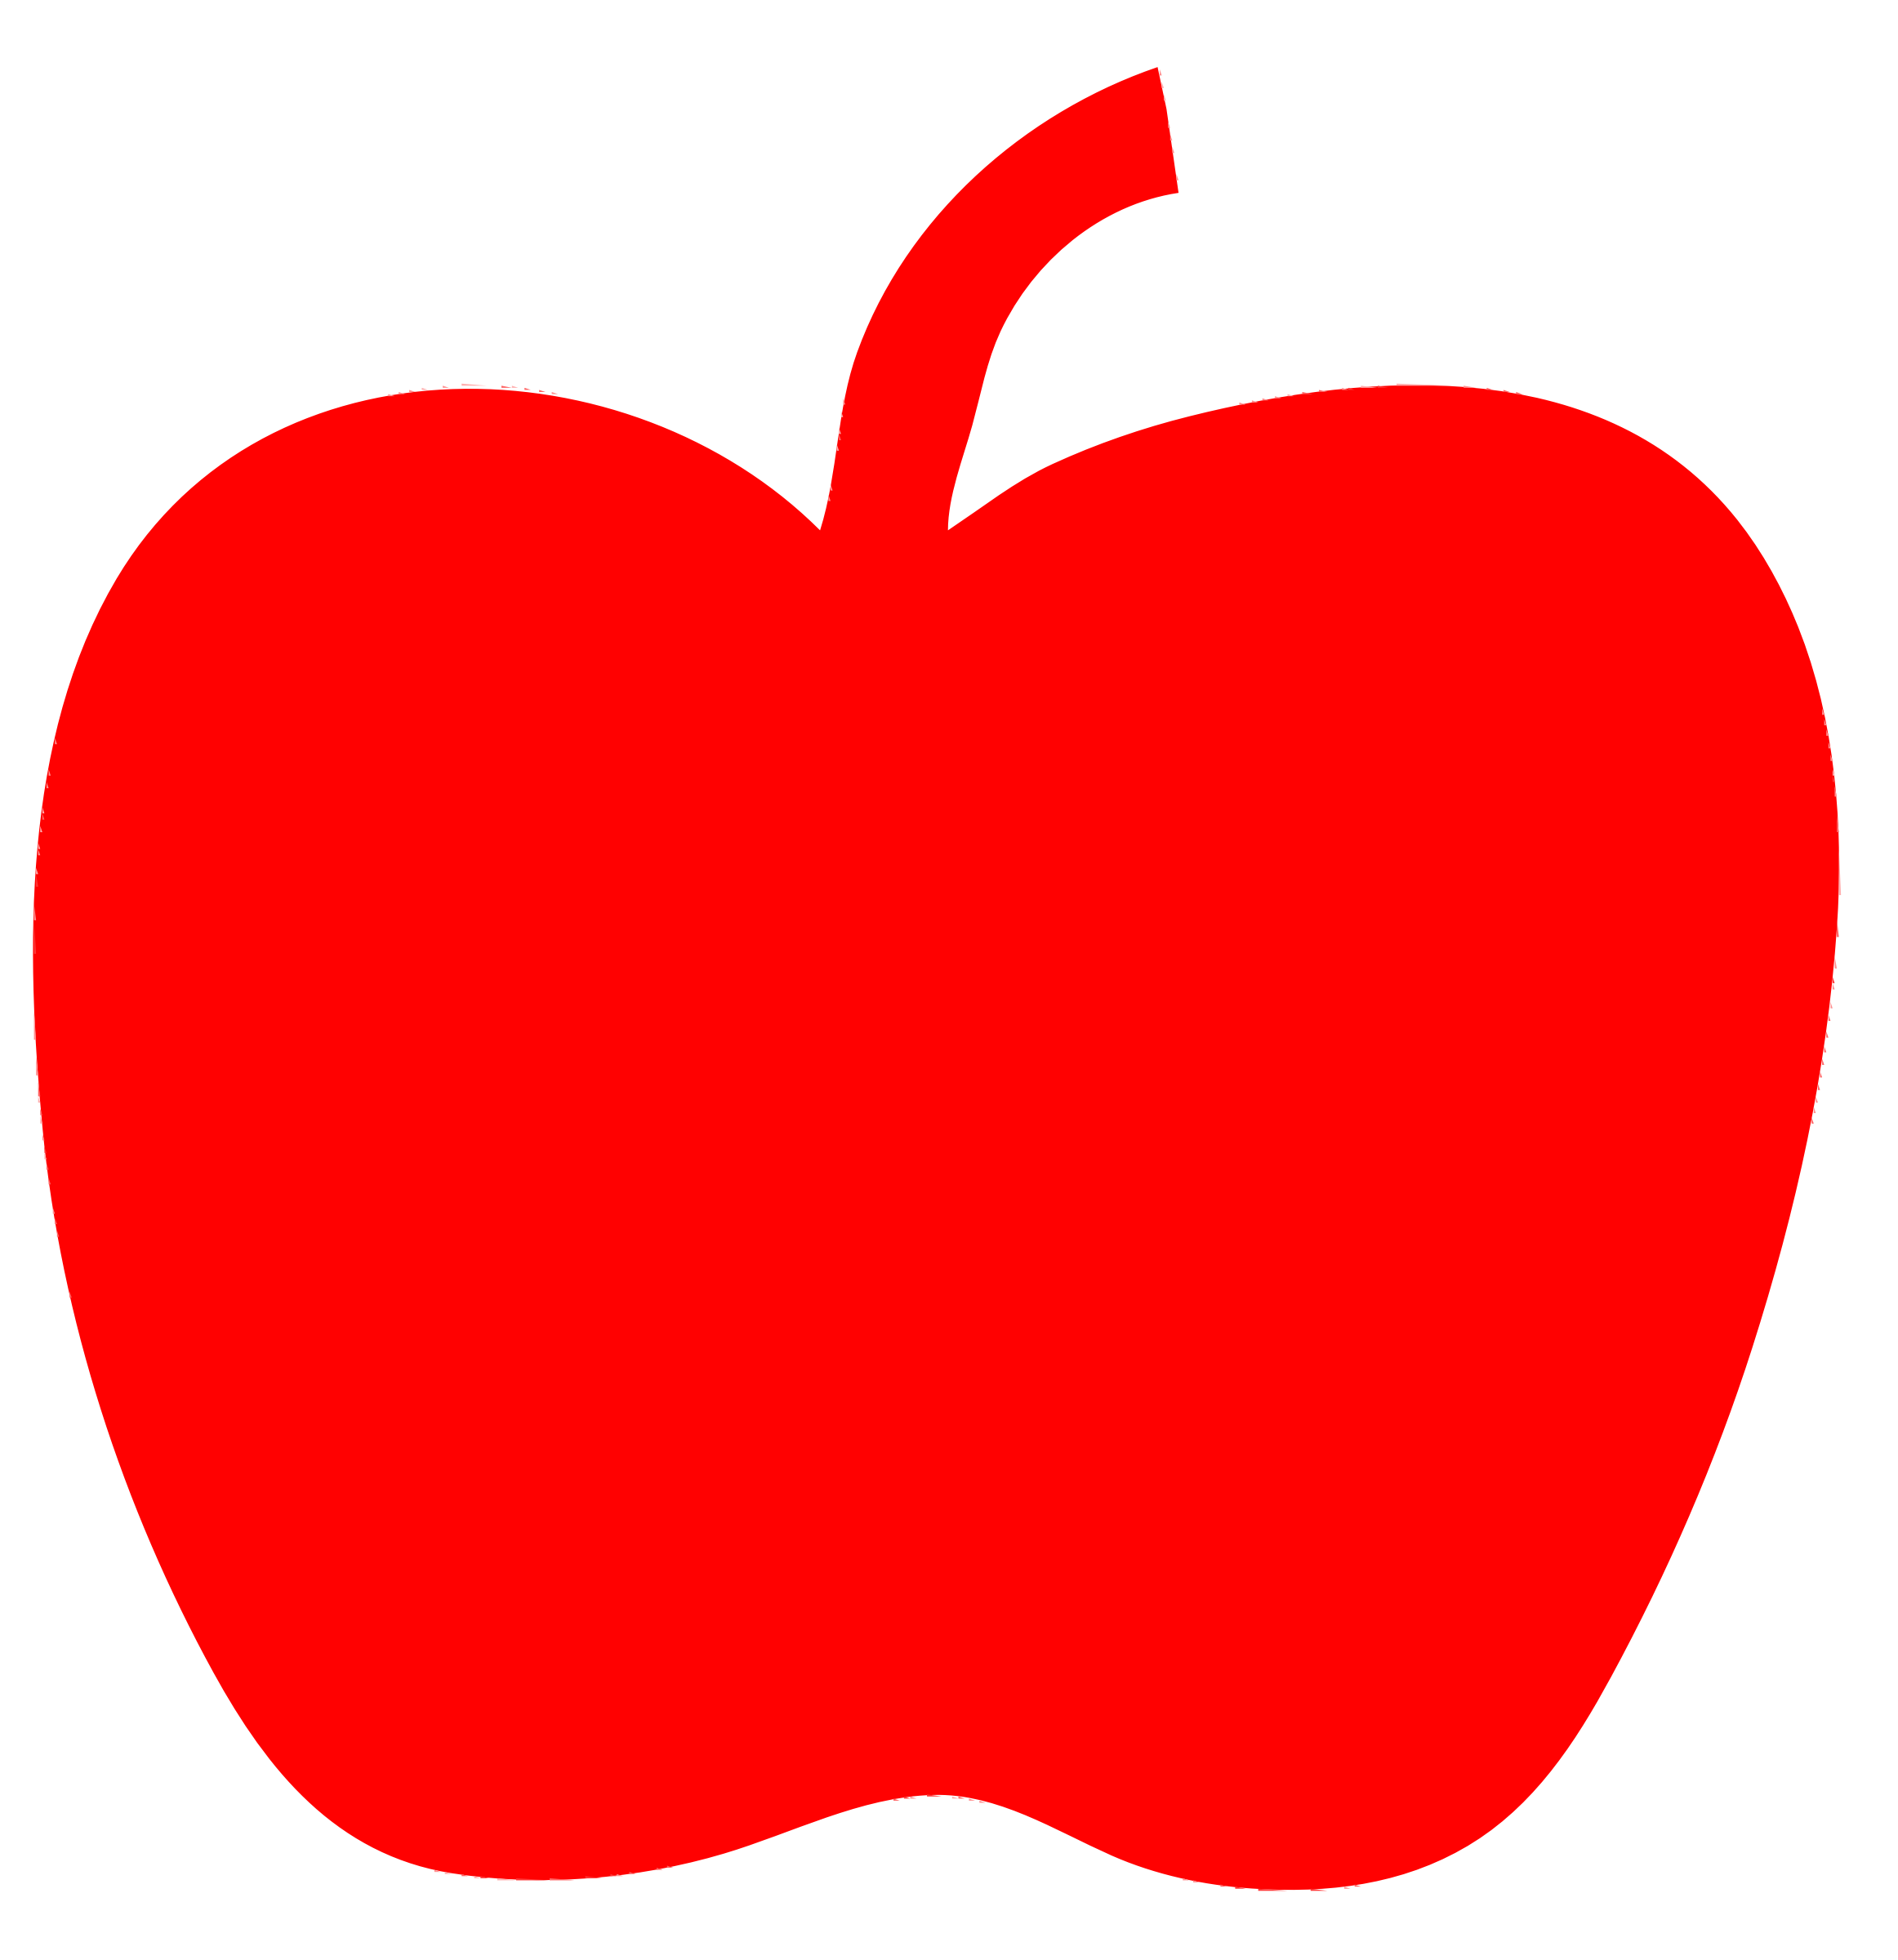 red apple clipart - photo #12